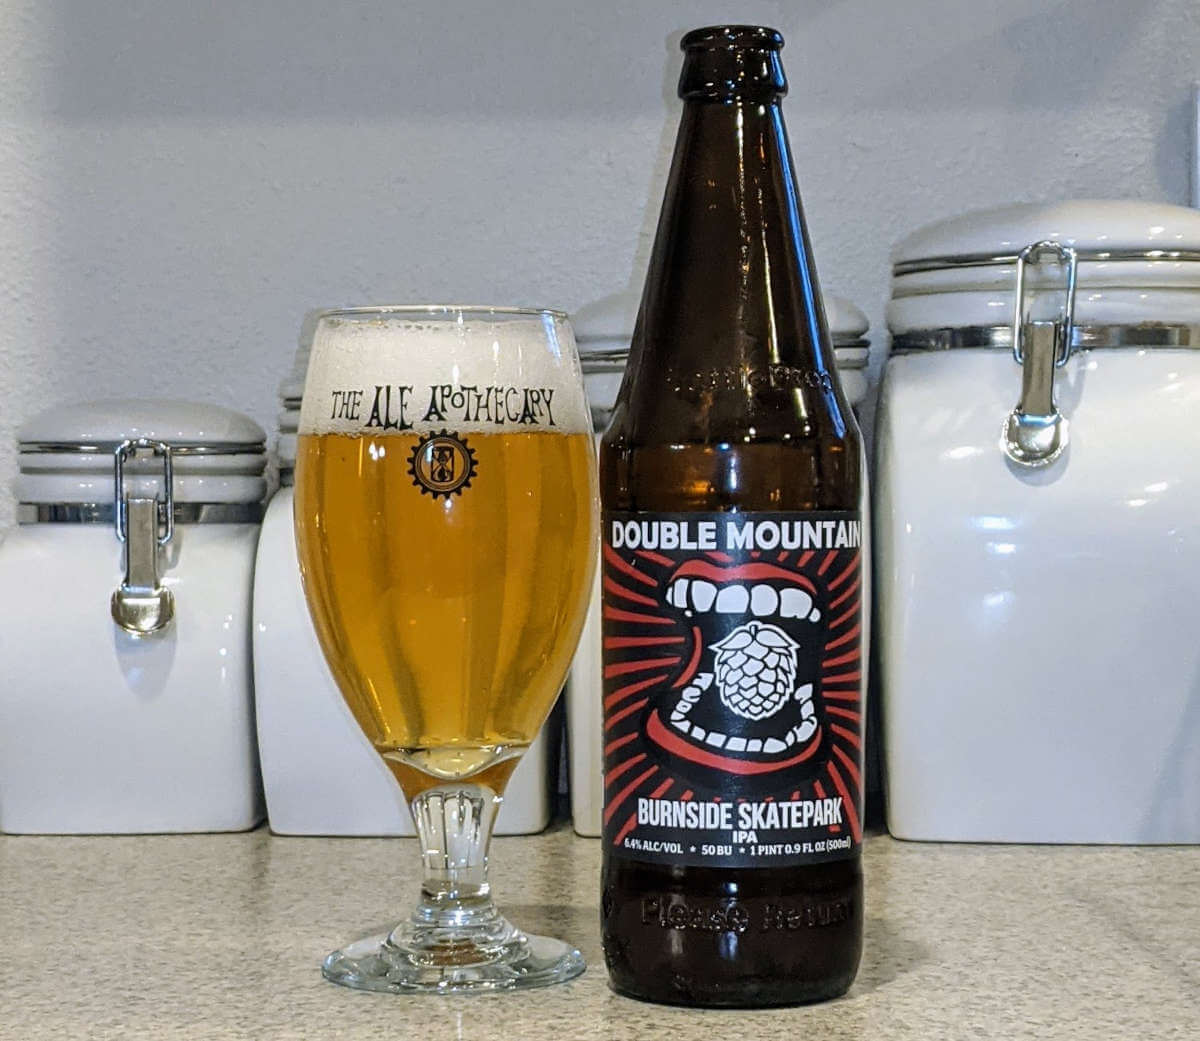 Double Mountain’s Burnside Skatepark IPA may be the dankest beer you’ll try all year